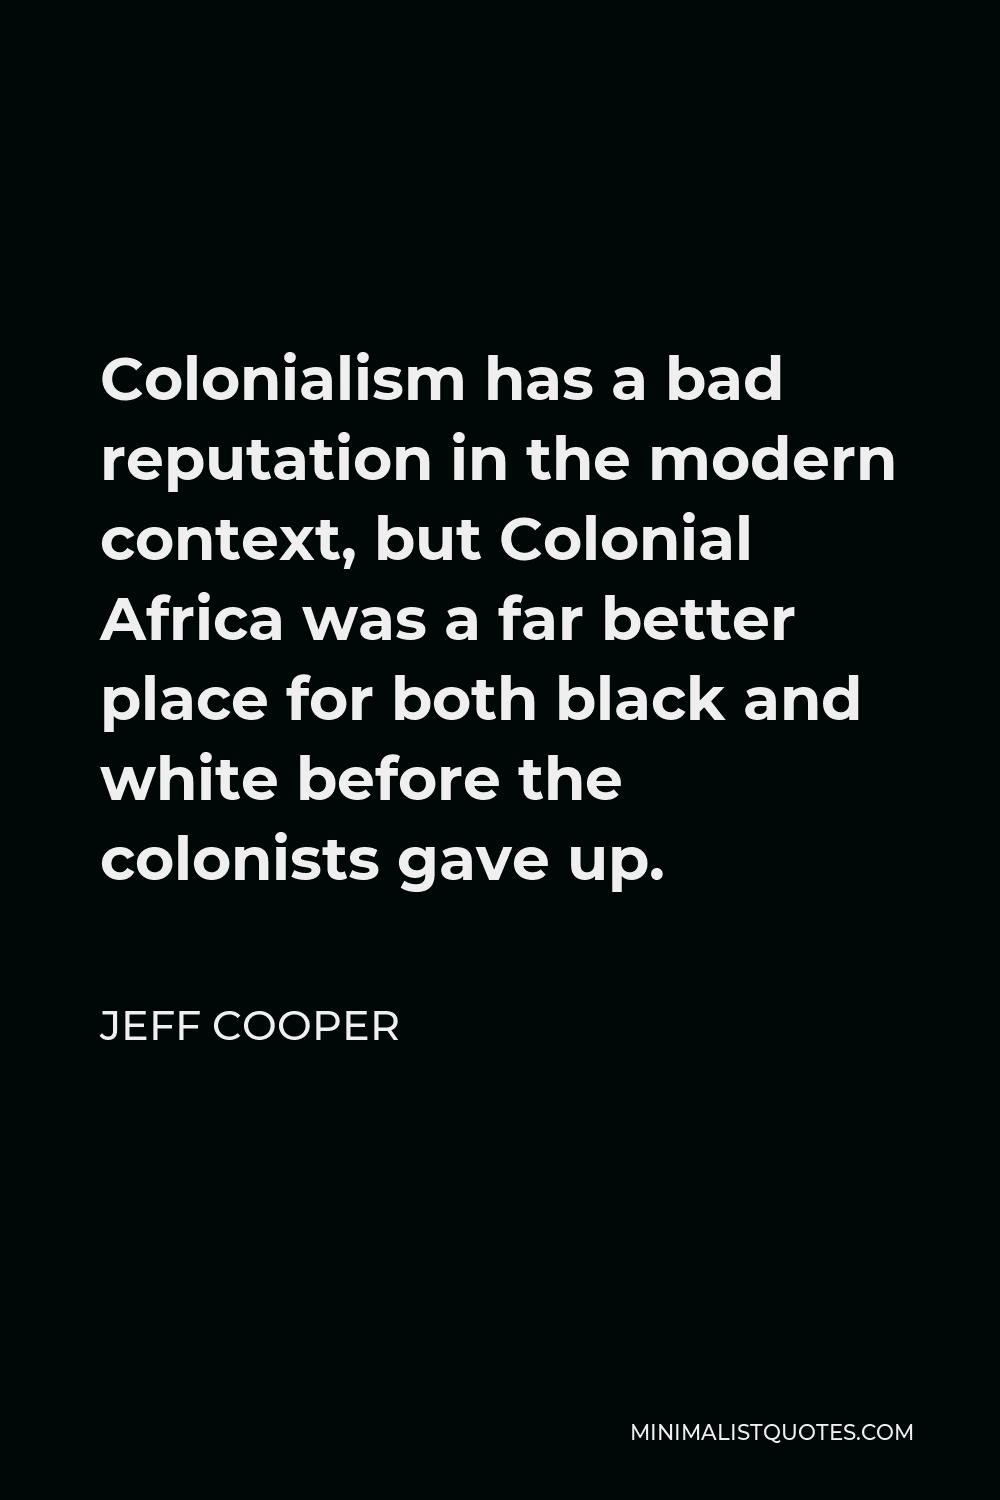 Jeff Cooper Quote - Colonialism has a bad reputation in the modern context, but Colonial Africa was a far better place for both black and white before the colonists gave up.